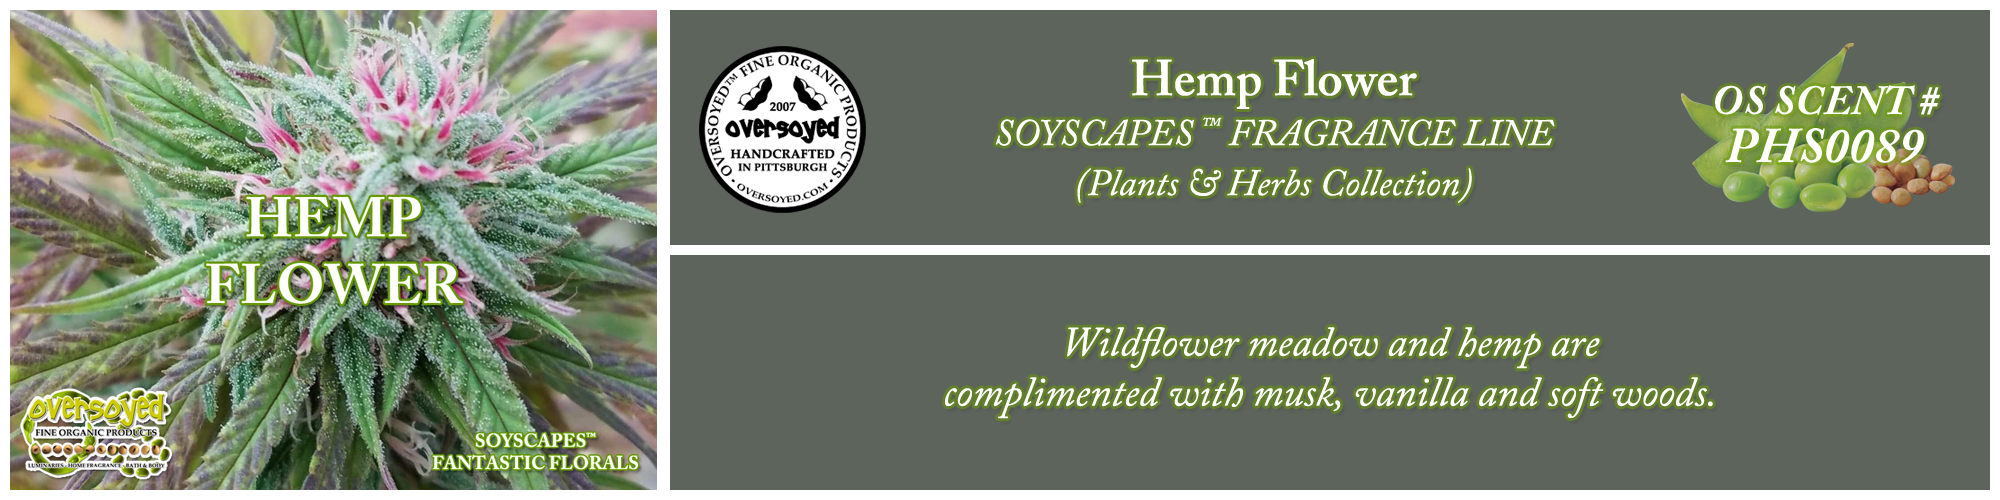 Hemp Flower Handcrafted Products Collection